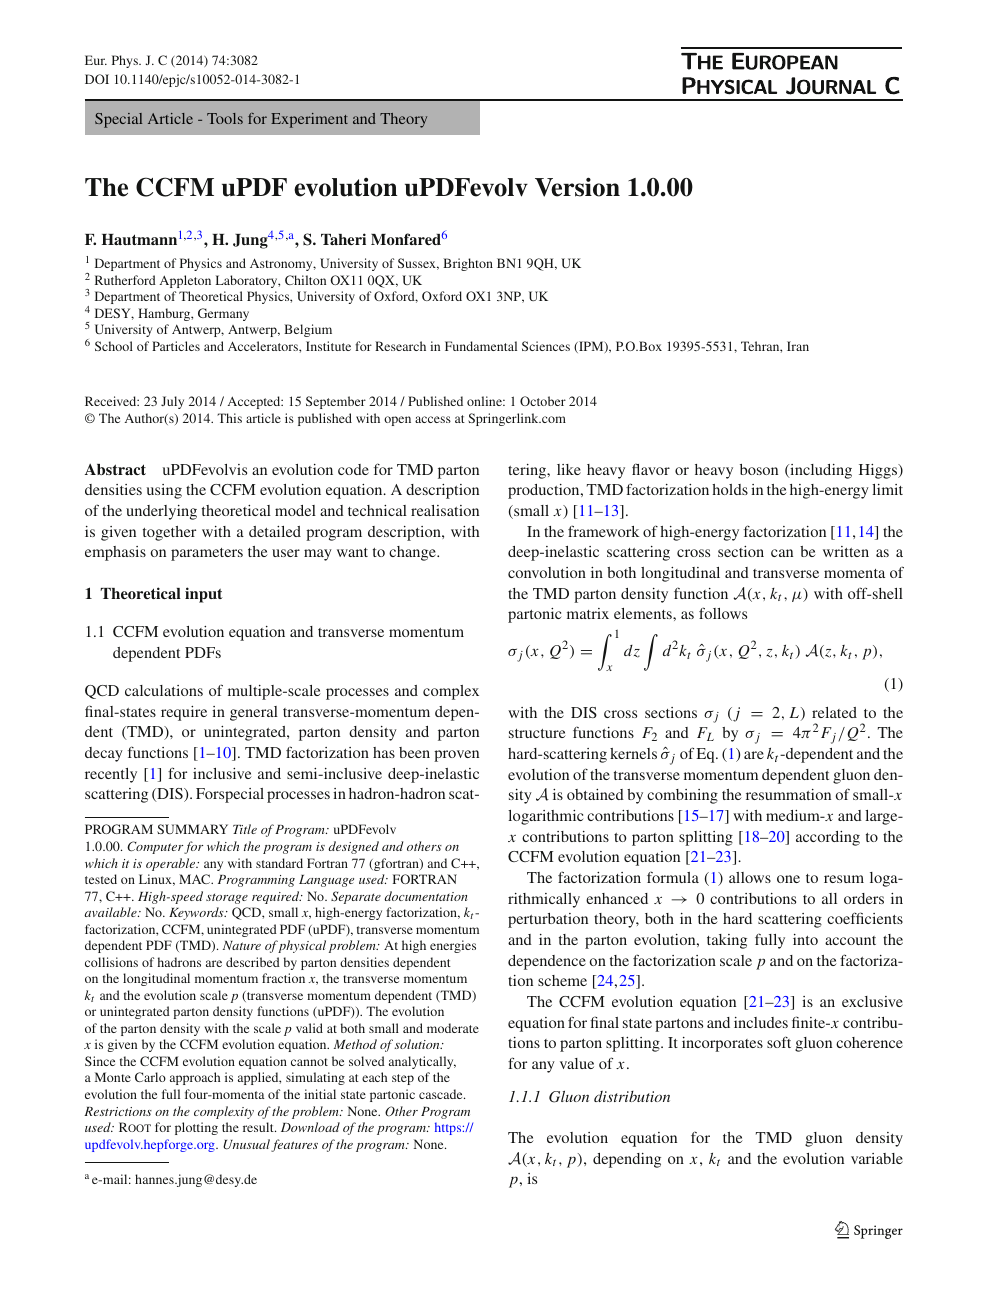 The Ccfm Updf Evolution Updfevolv Version 1 0 00 Topic Of Research Paper In Physical Sciences Download Scholarly Article Pdf And Read For Free On Cyberleninka Open Science Hub